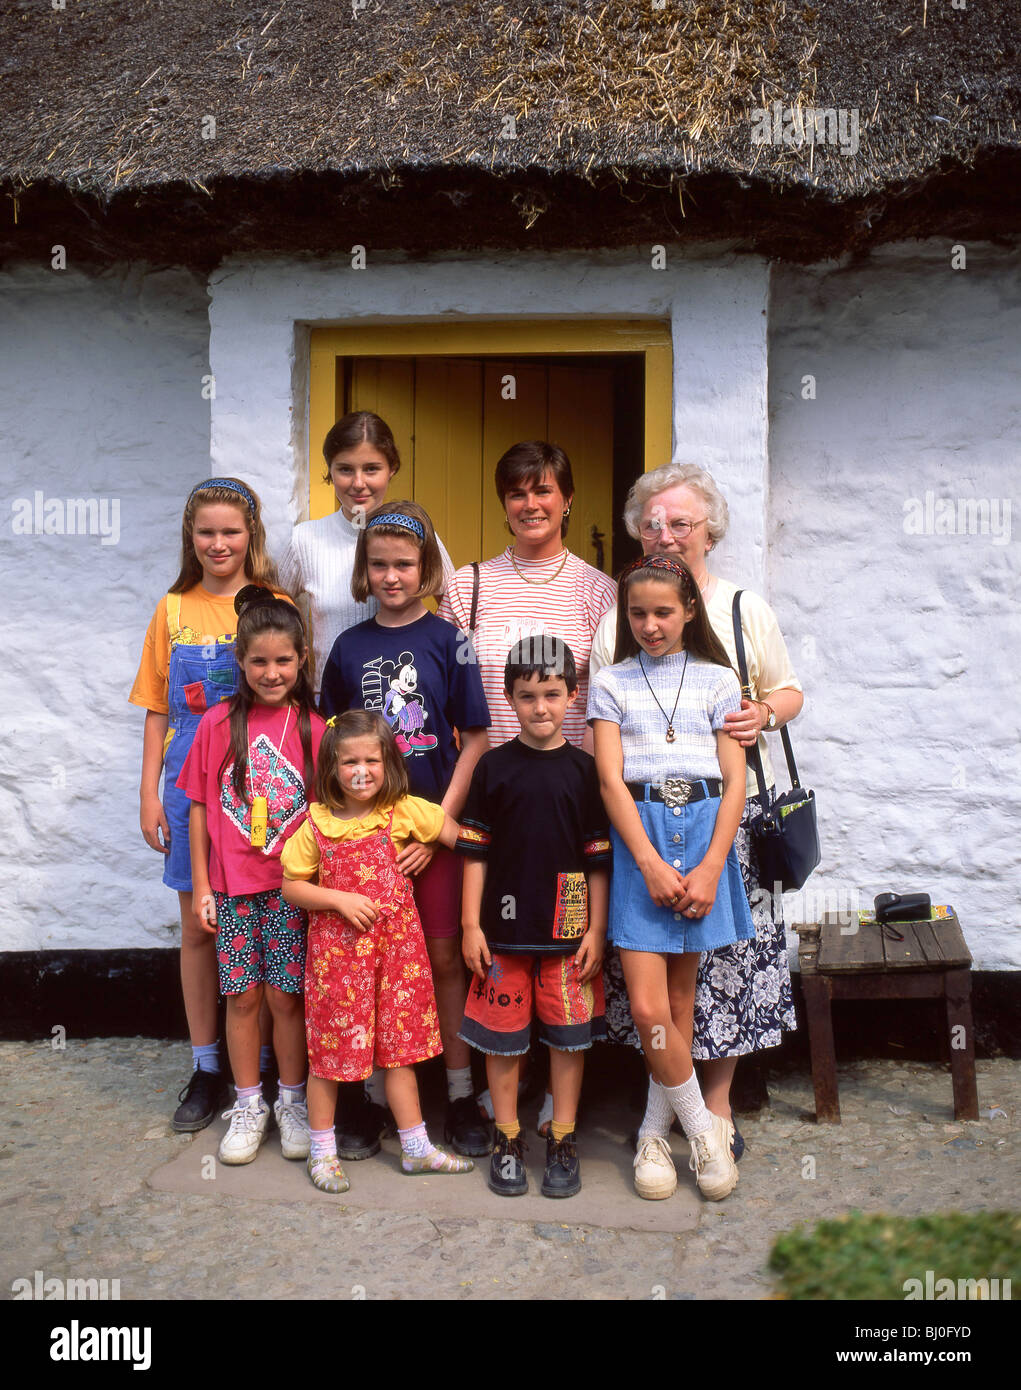 Family group outside farmhouse, Ulster Folk & Transport Museum, County Down, Northern Ireland, United Kingdom Stock Photo